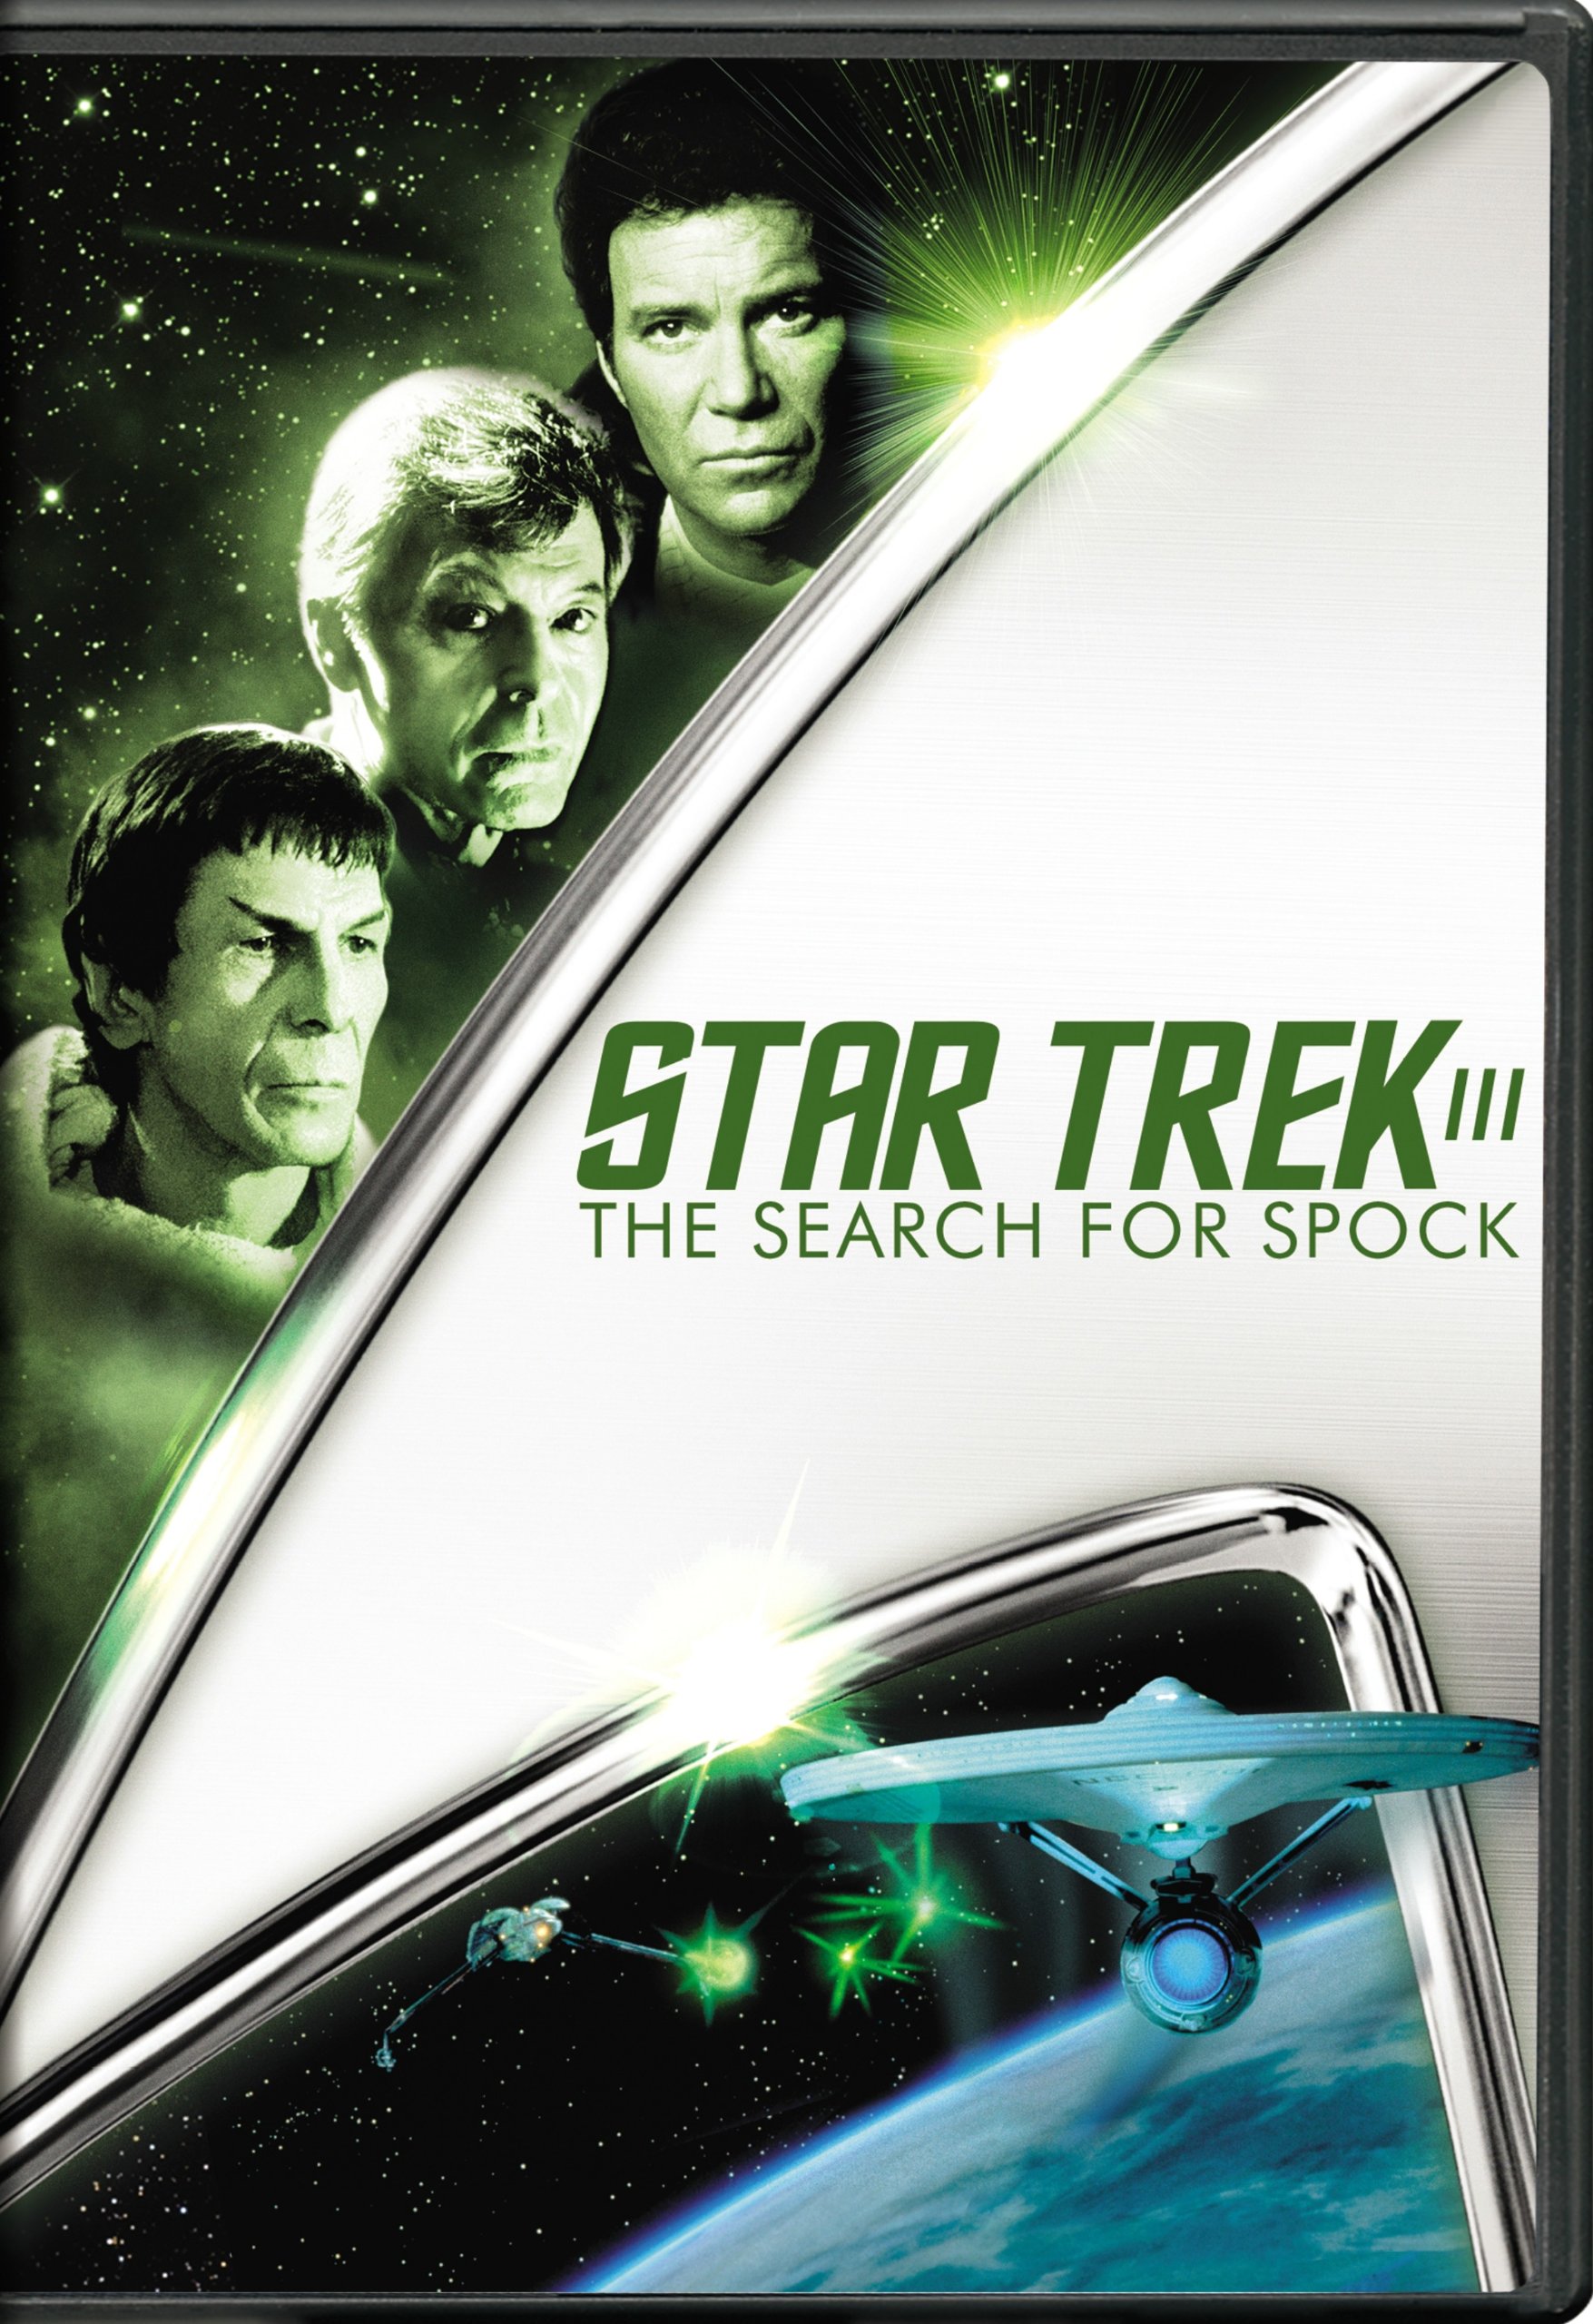 Star Trek III: The Search For Spock #25